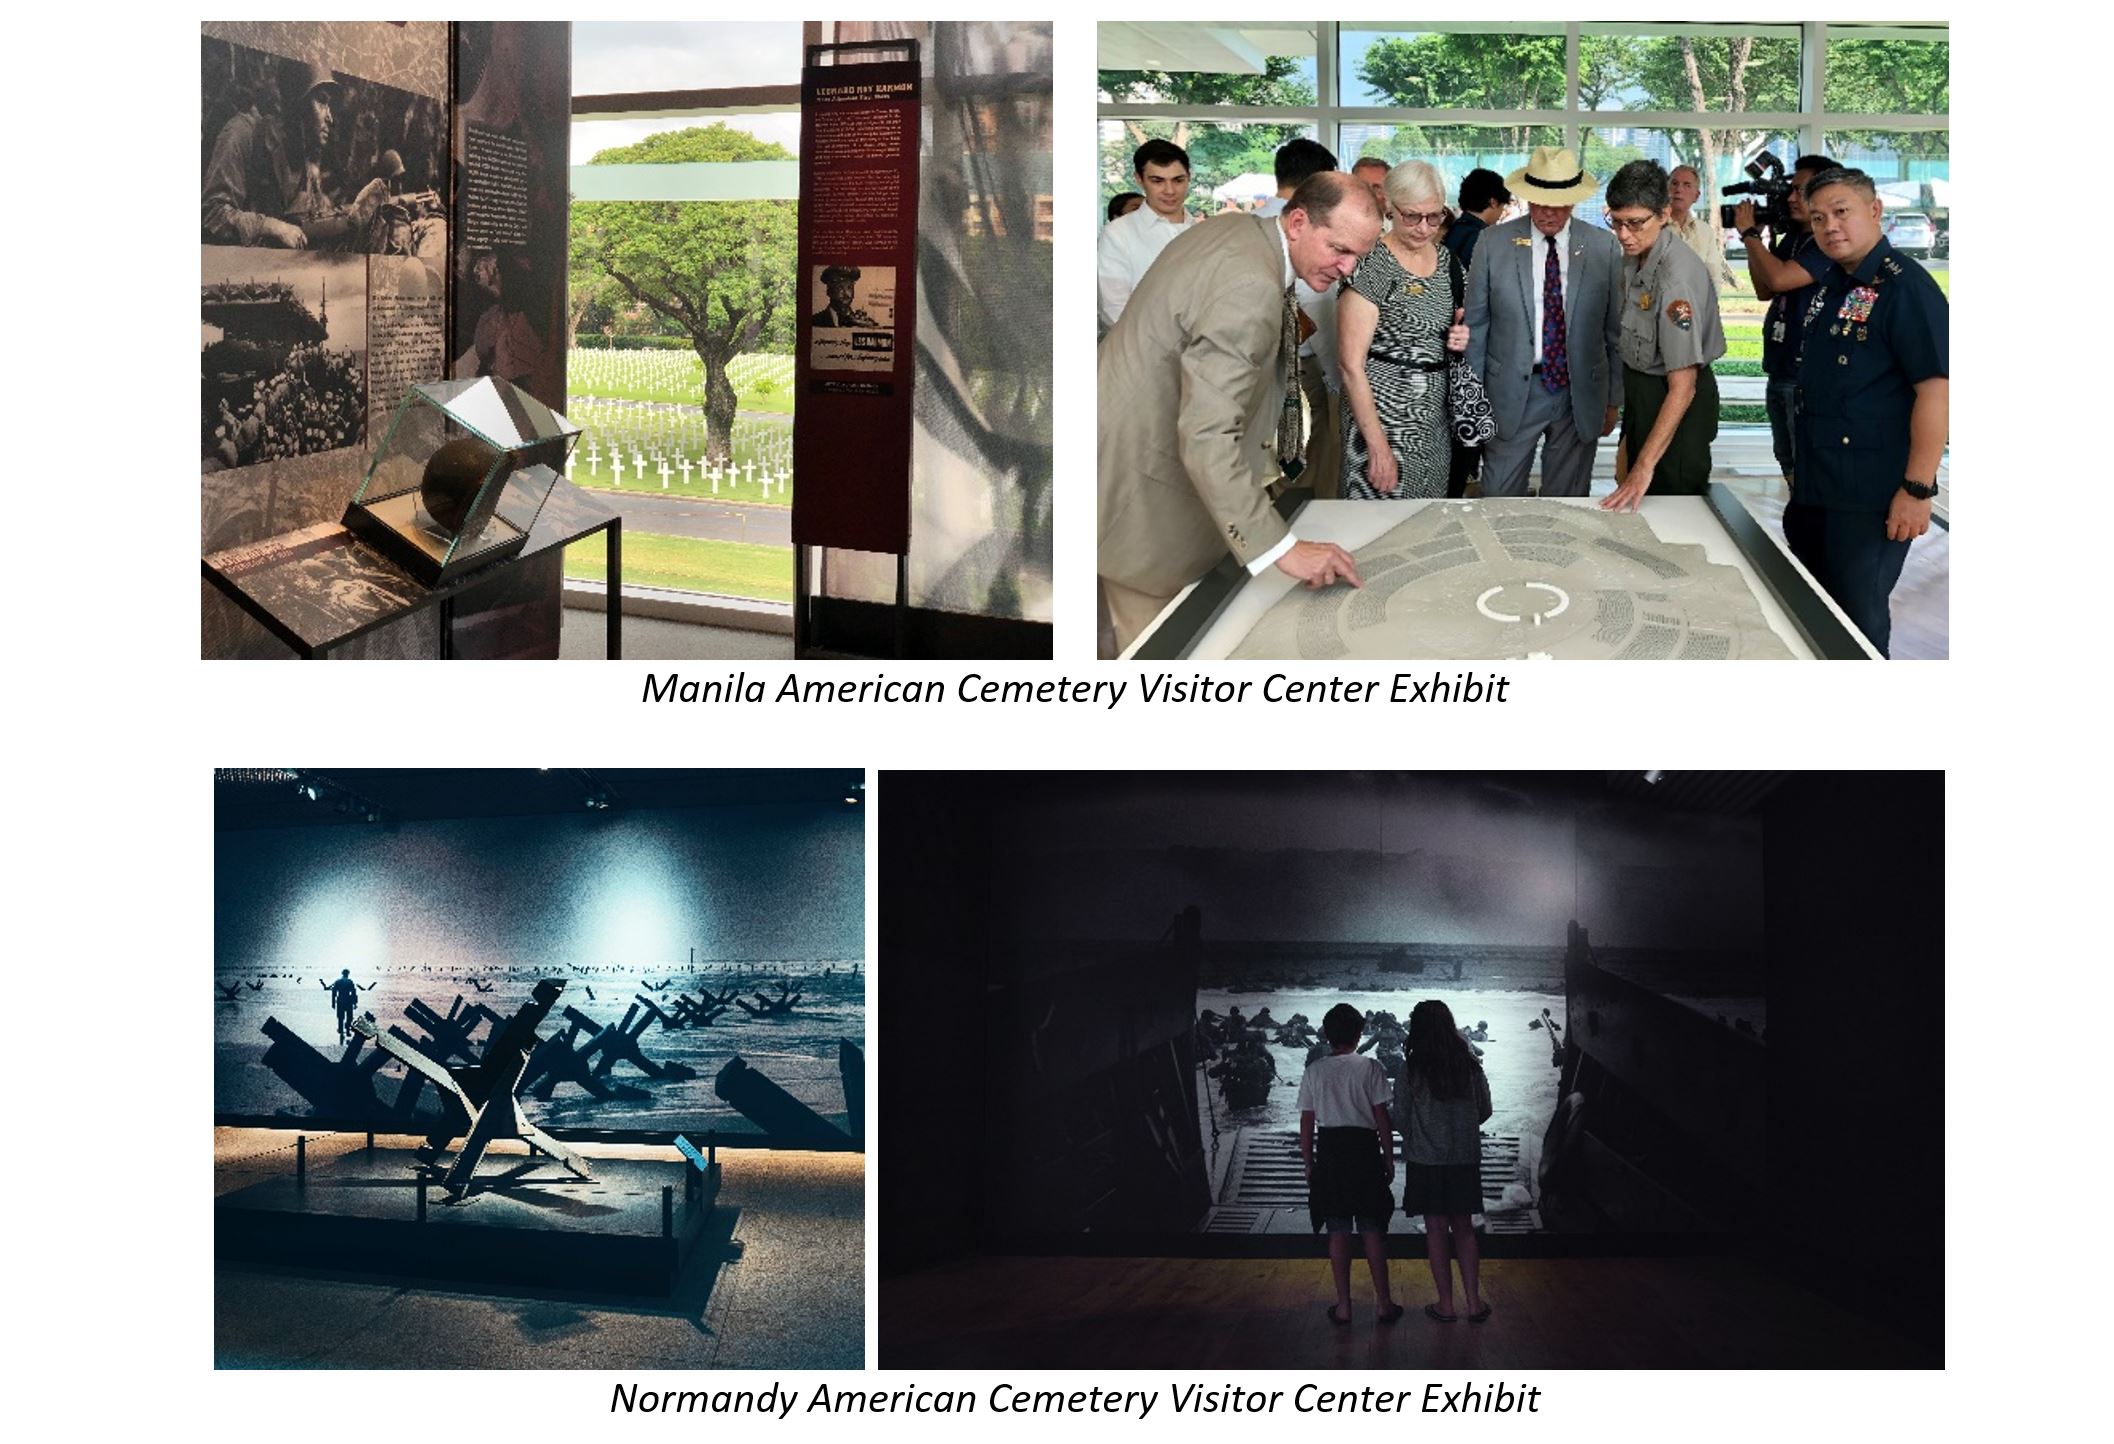 Visitor Center Exhibits at Manila and Normandy American Cemeteries